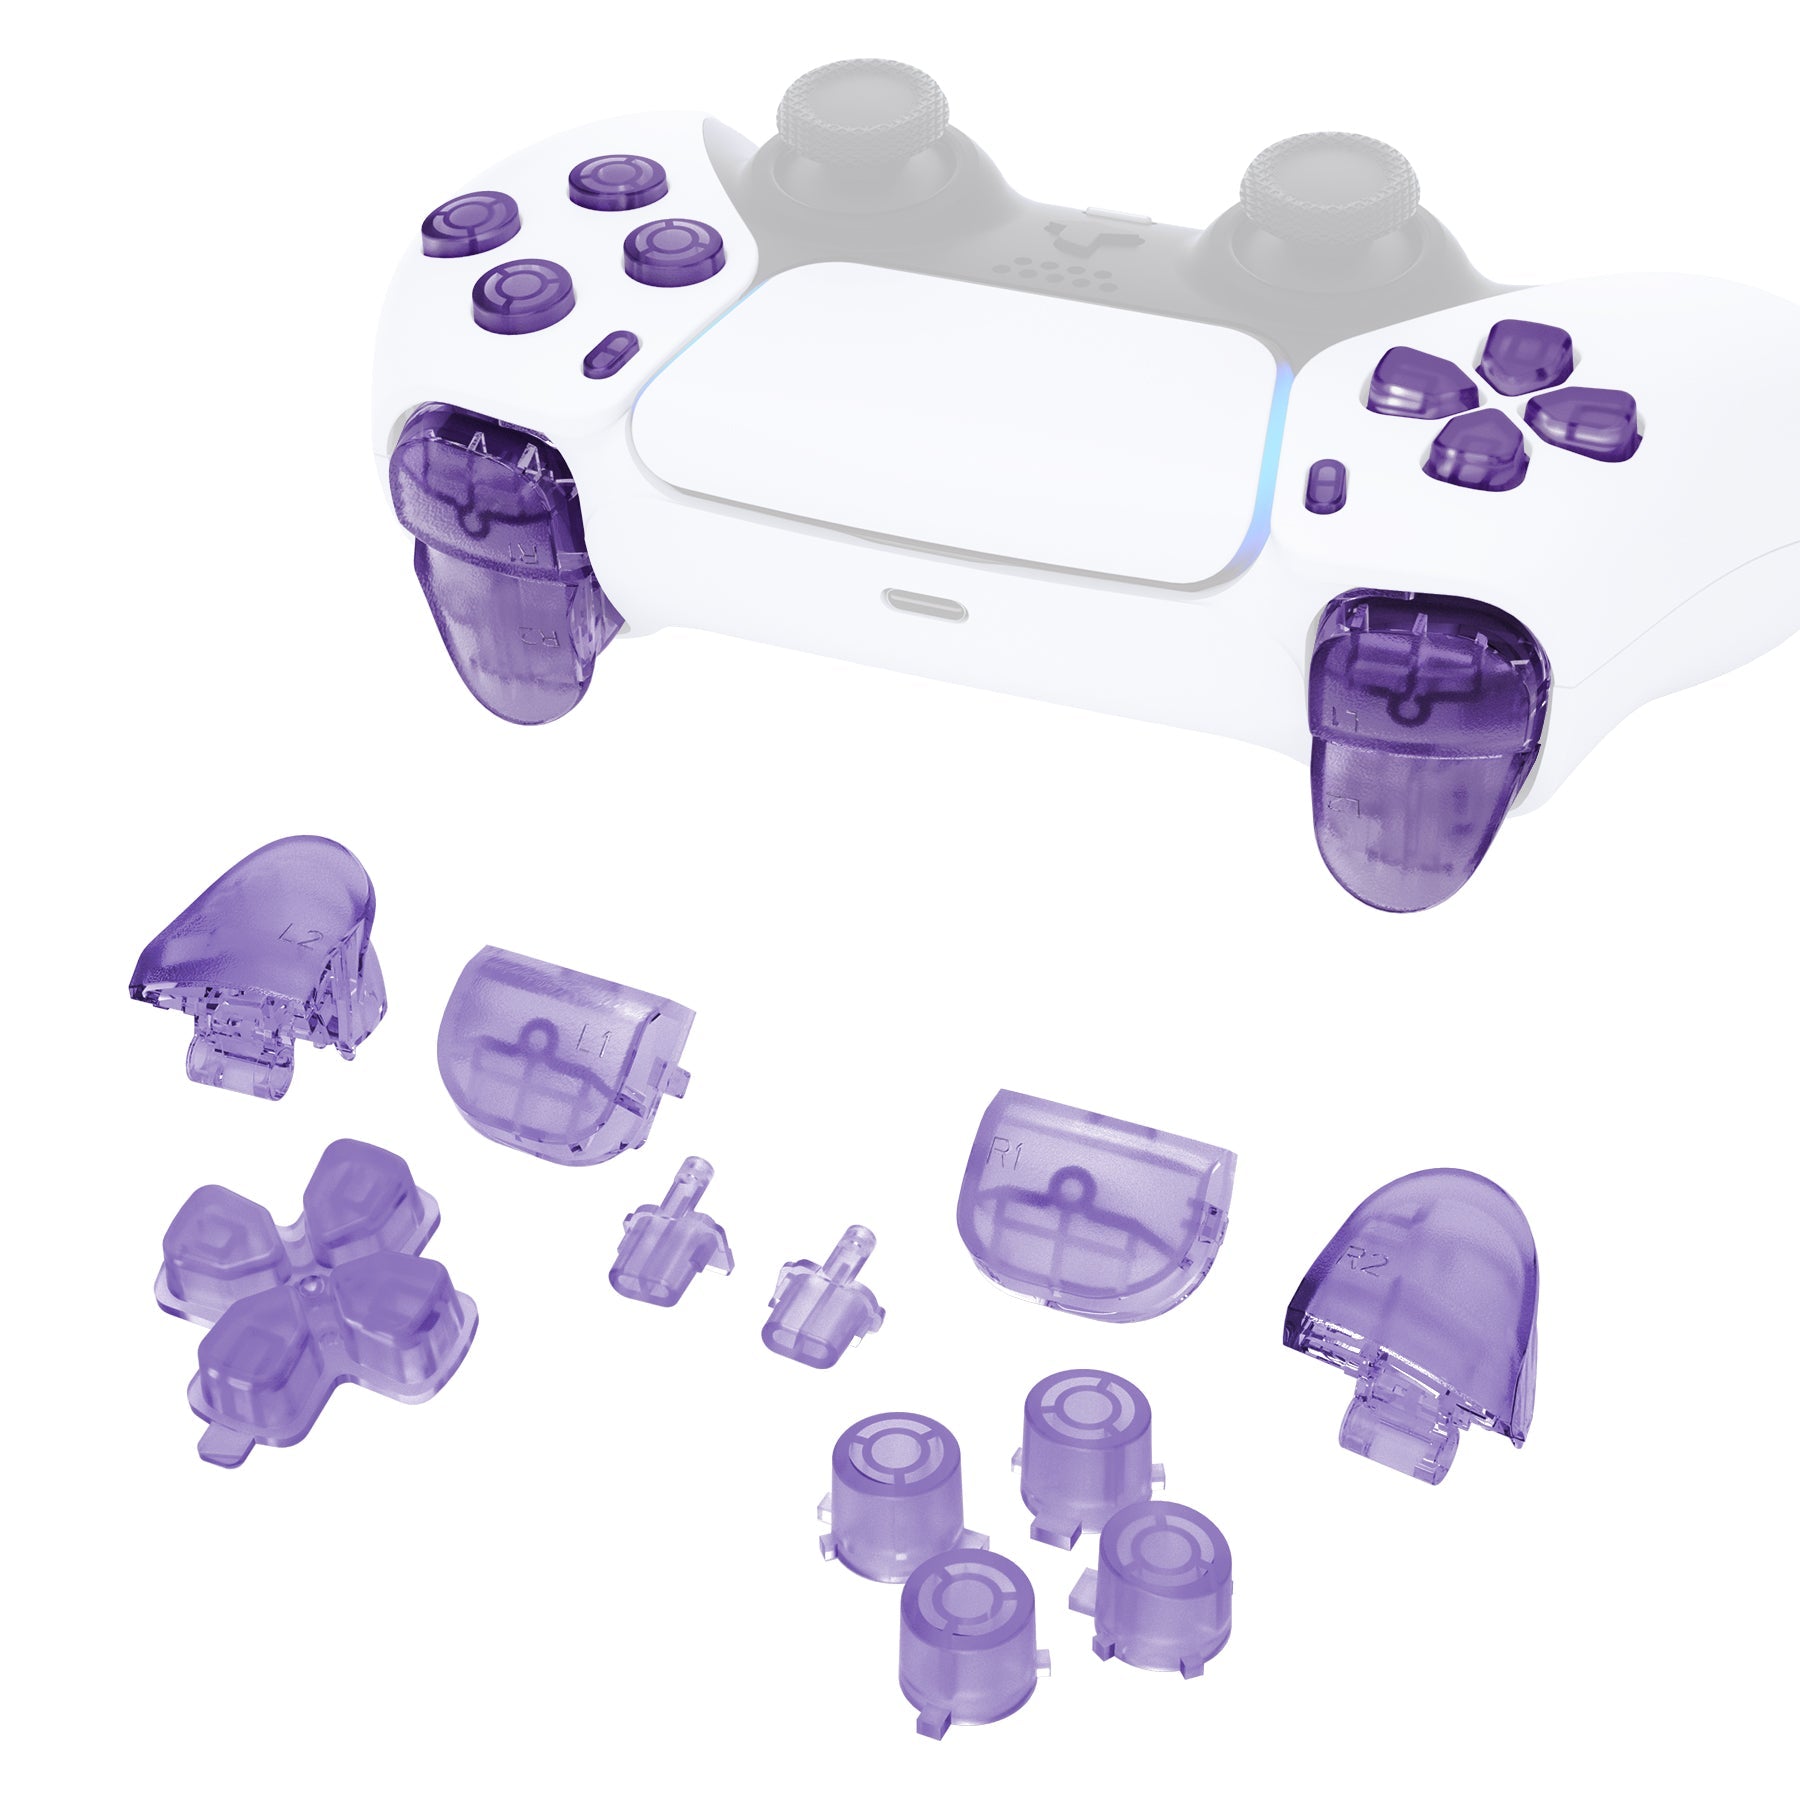 eXtremeRate Retail Replacement D-pad R1 L1 R2 L2 Triggers Share Options Face Buttons, Clear Atomic Purple Full Set Buttons Compatible With ps5 Controller BDM-010 & BDM-020 - JPF3005G2